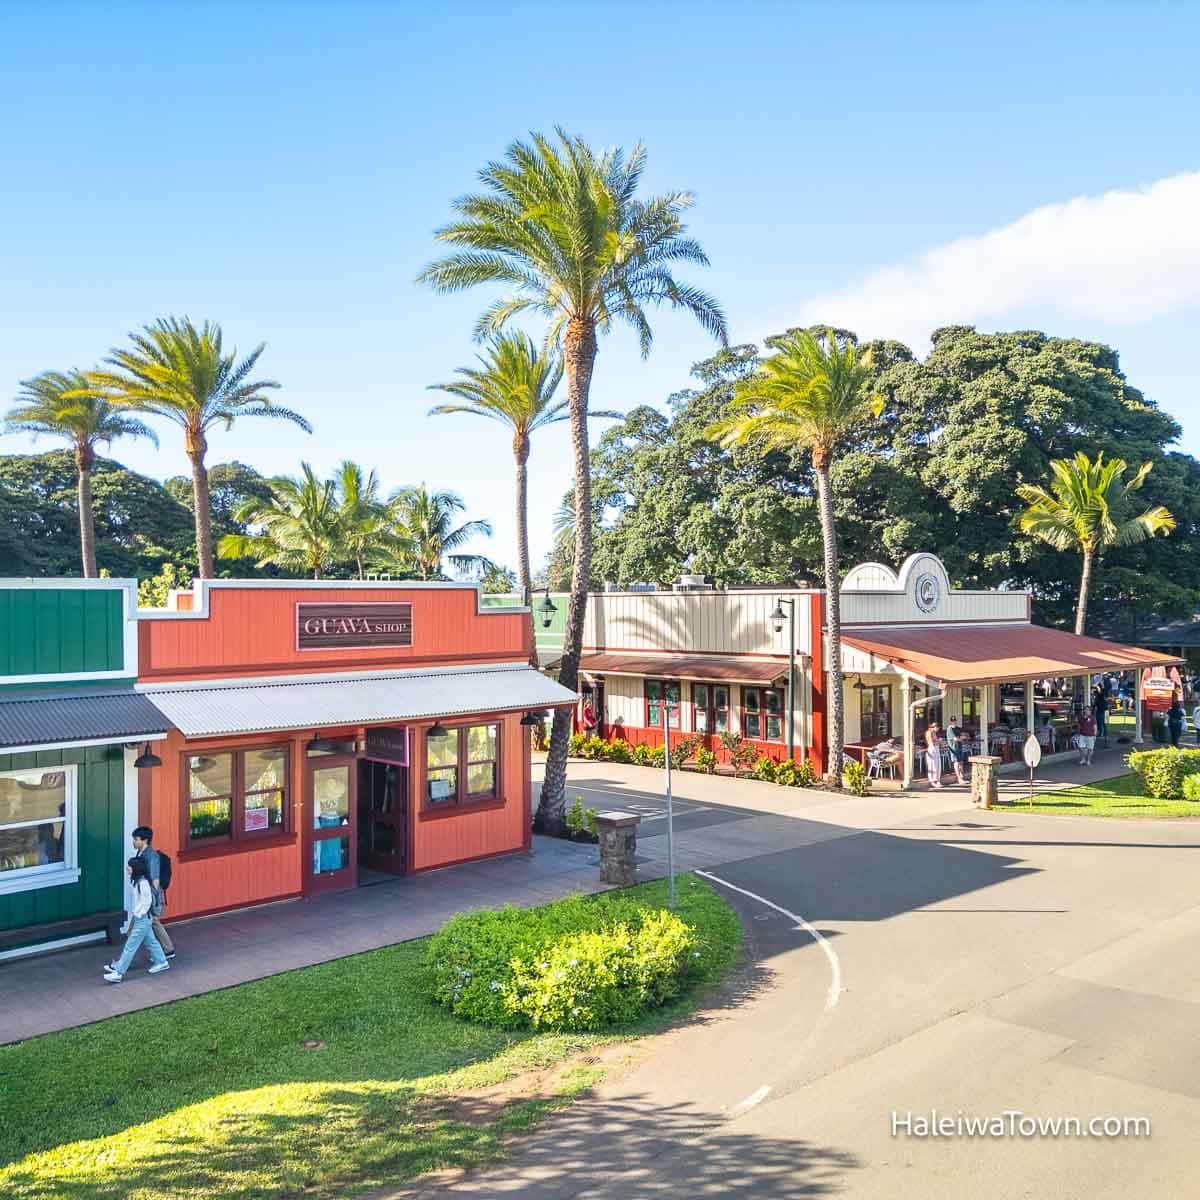 center of haleiwa town with colorful restaurants and shops, palm trees and people on the sidewalks